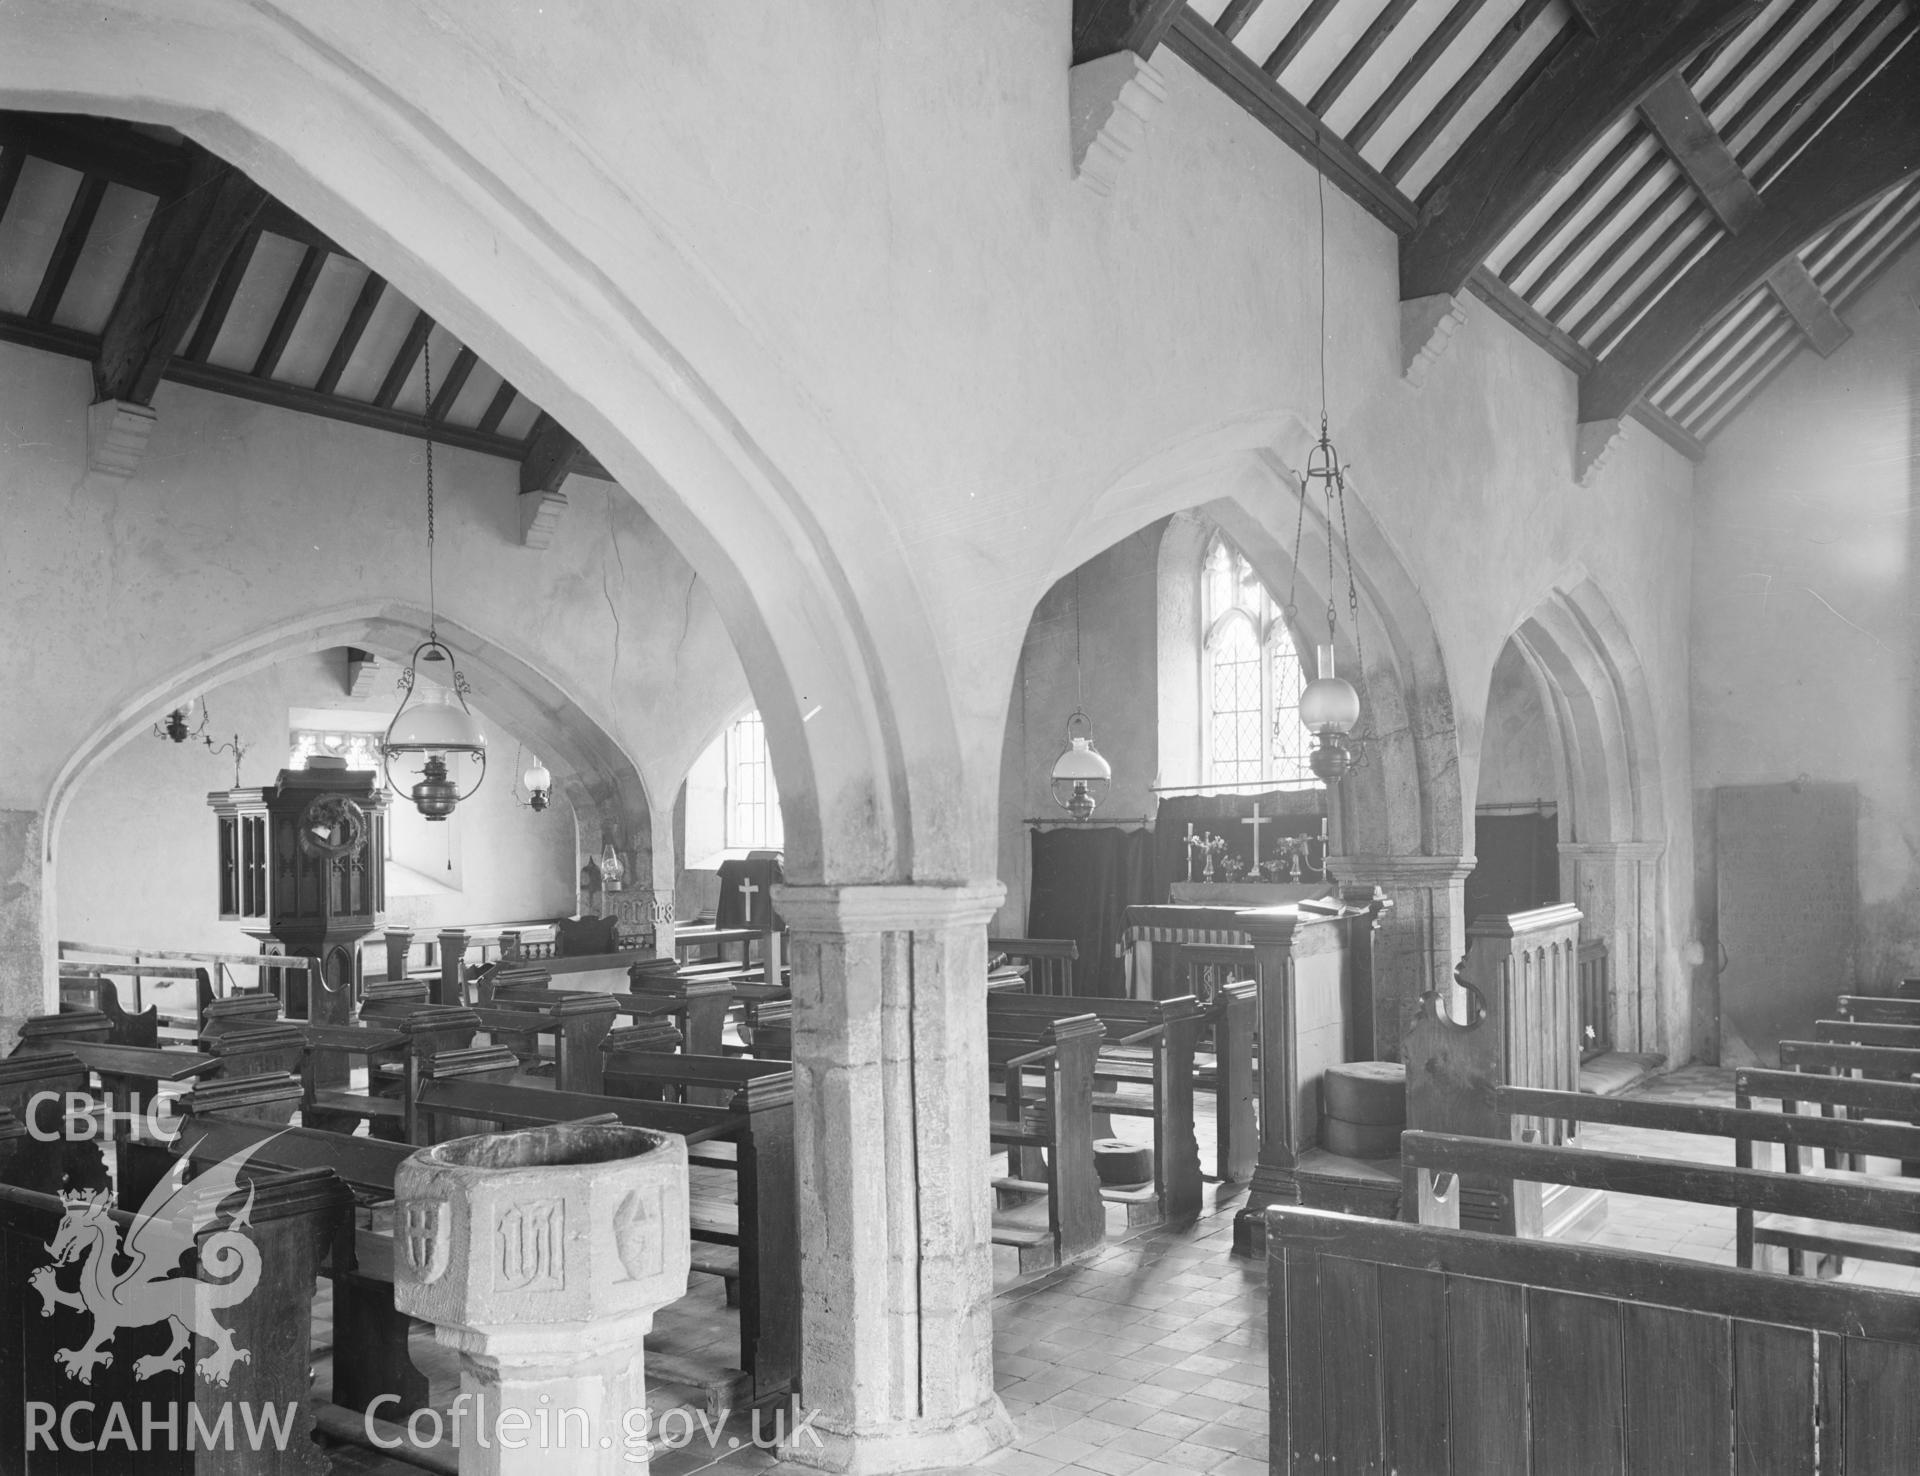 Black and white nitrate negative showing interior view of Llangwnadl Church.